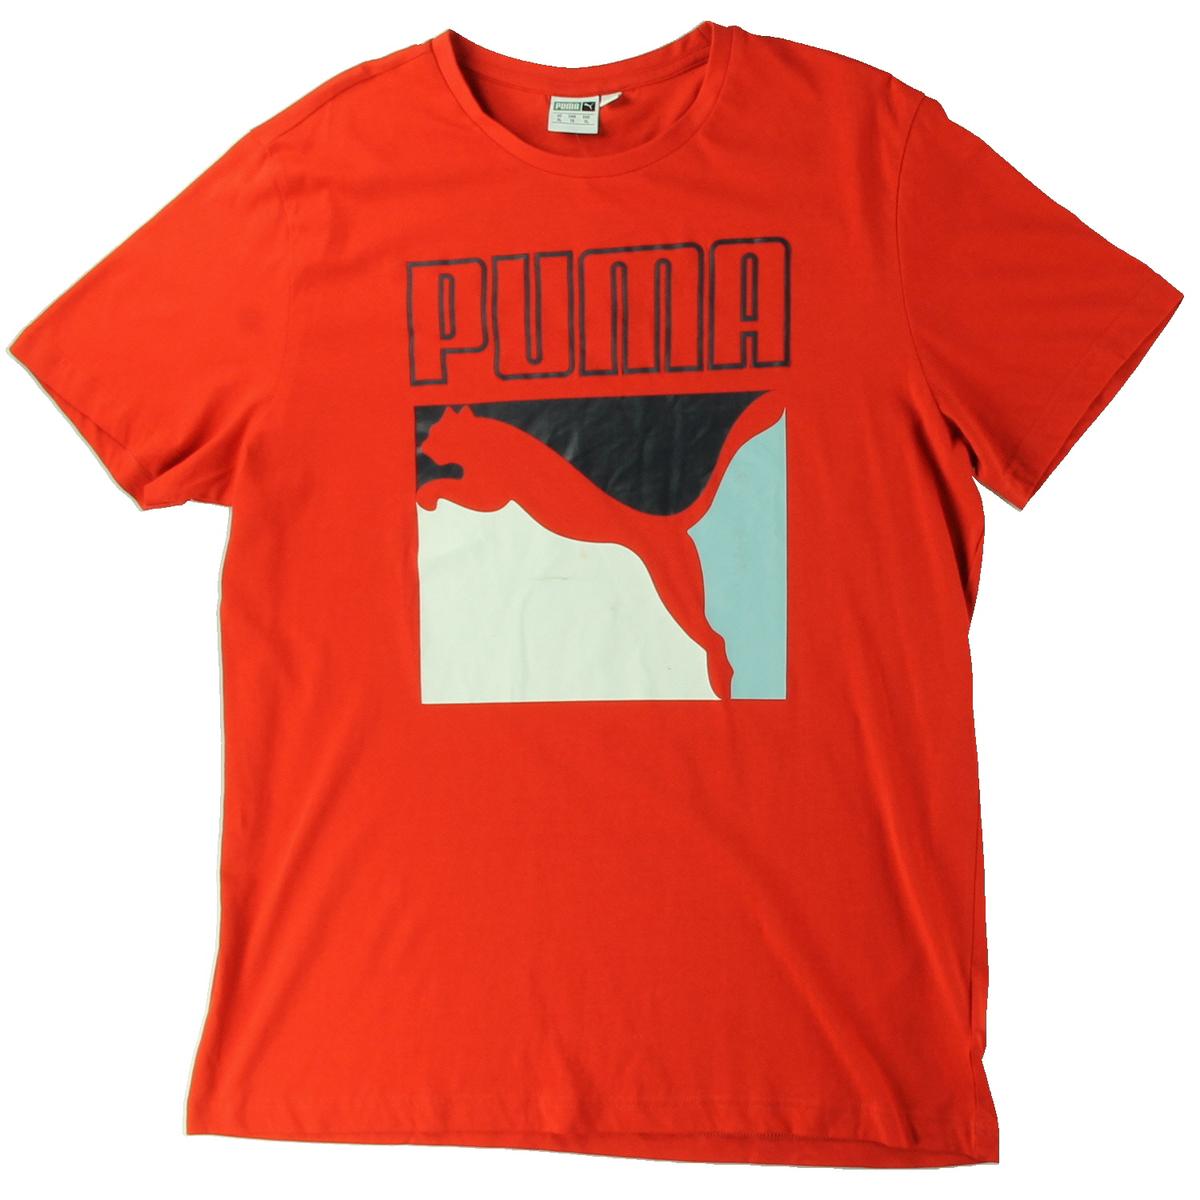 Puma Mens Red Running Fitness Workout T-Shirt Athletic XL BHFO 9710 ...